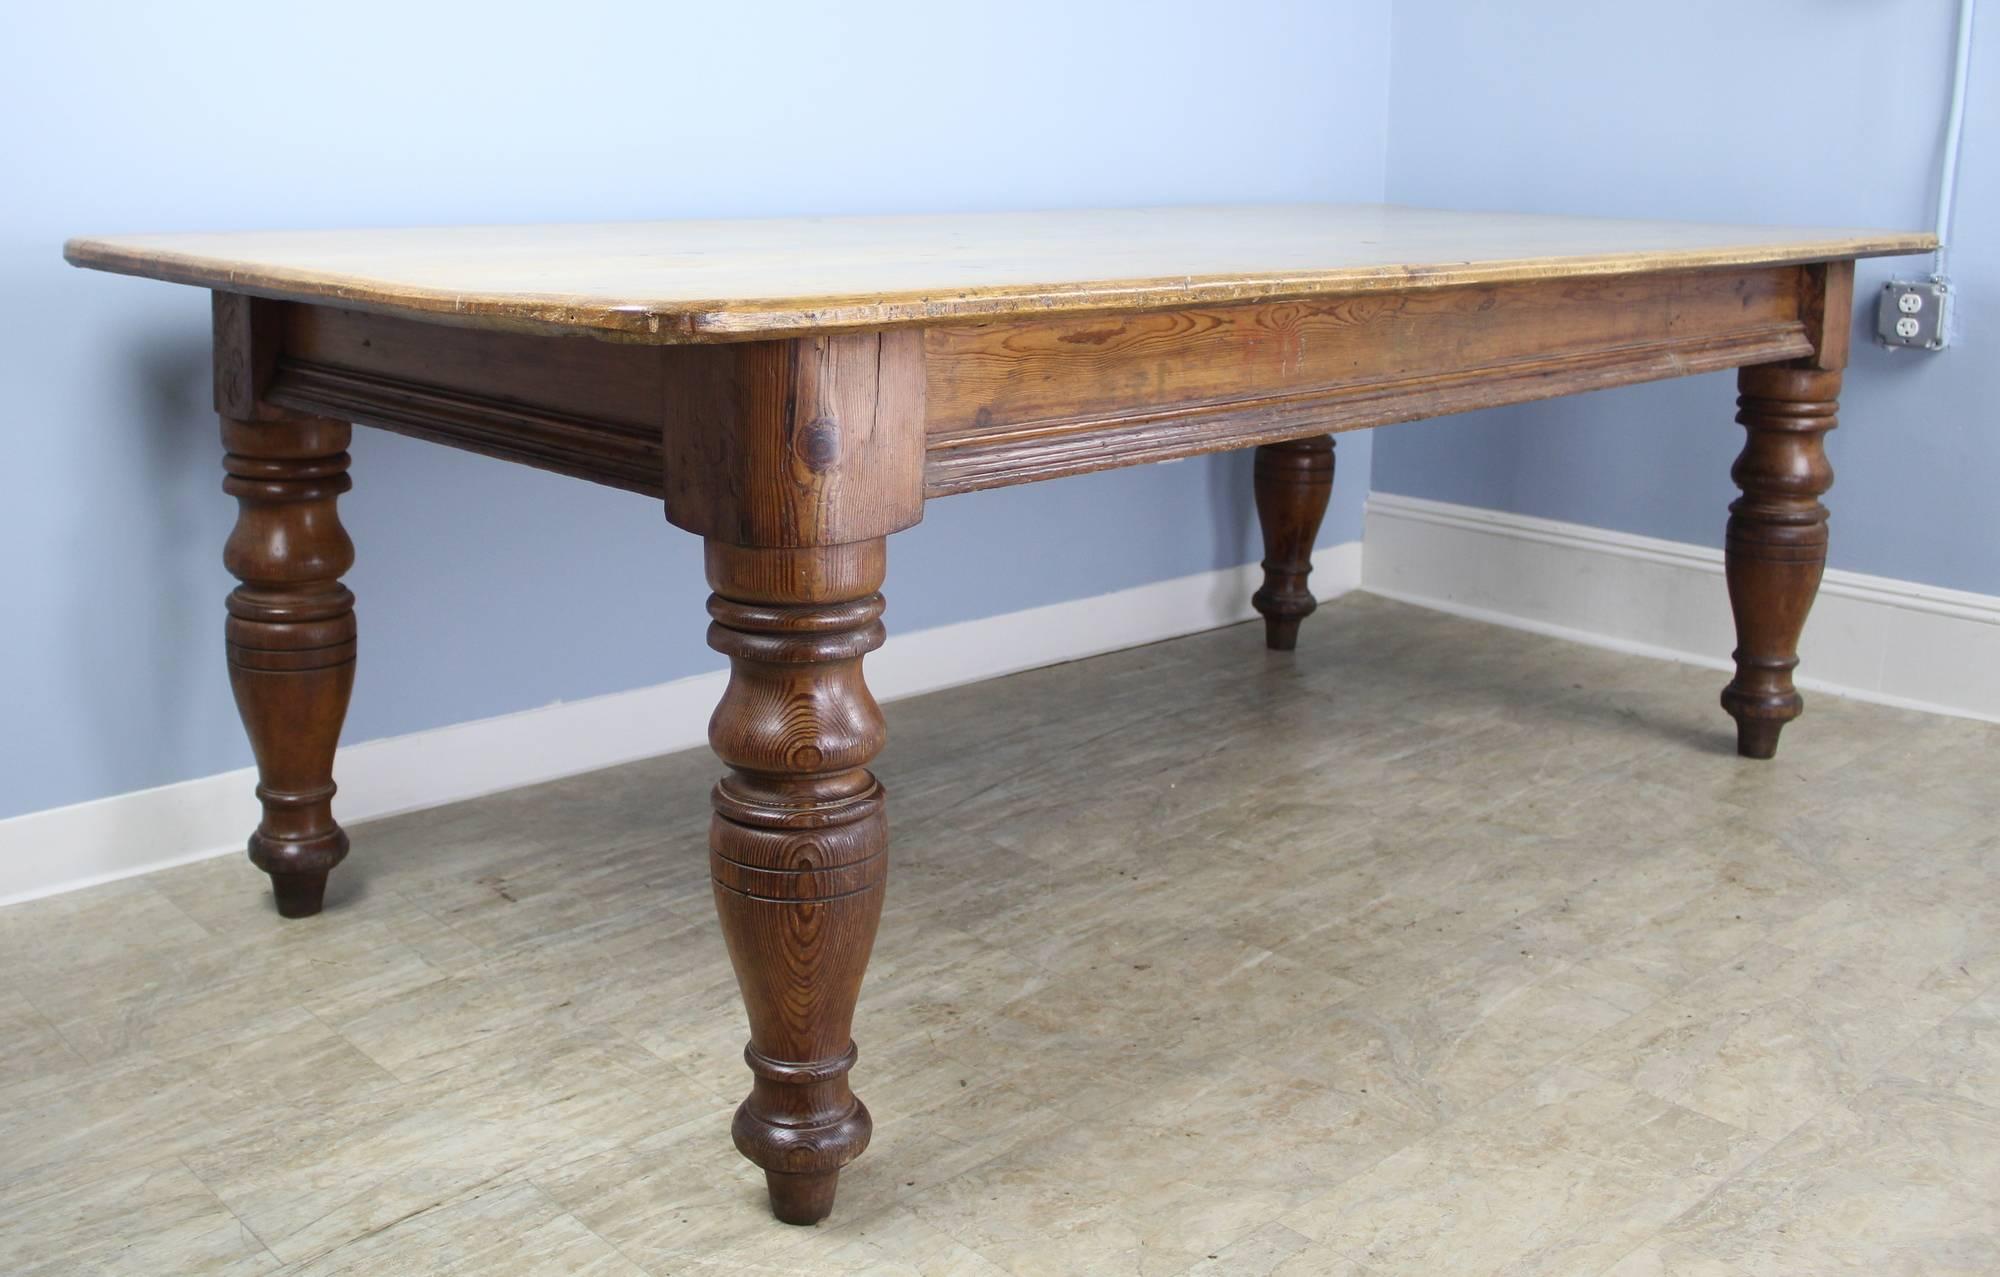 An exceptionally deep and largely proportioned pine farm table with a scrubbed blond pine top and big chunky turned legs. A handsome and unique look with interesting distress and real design presence. The 24.5 inch apron height is good for knees and